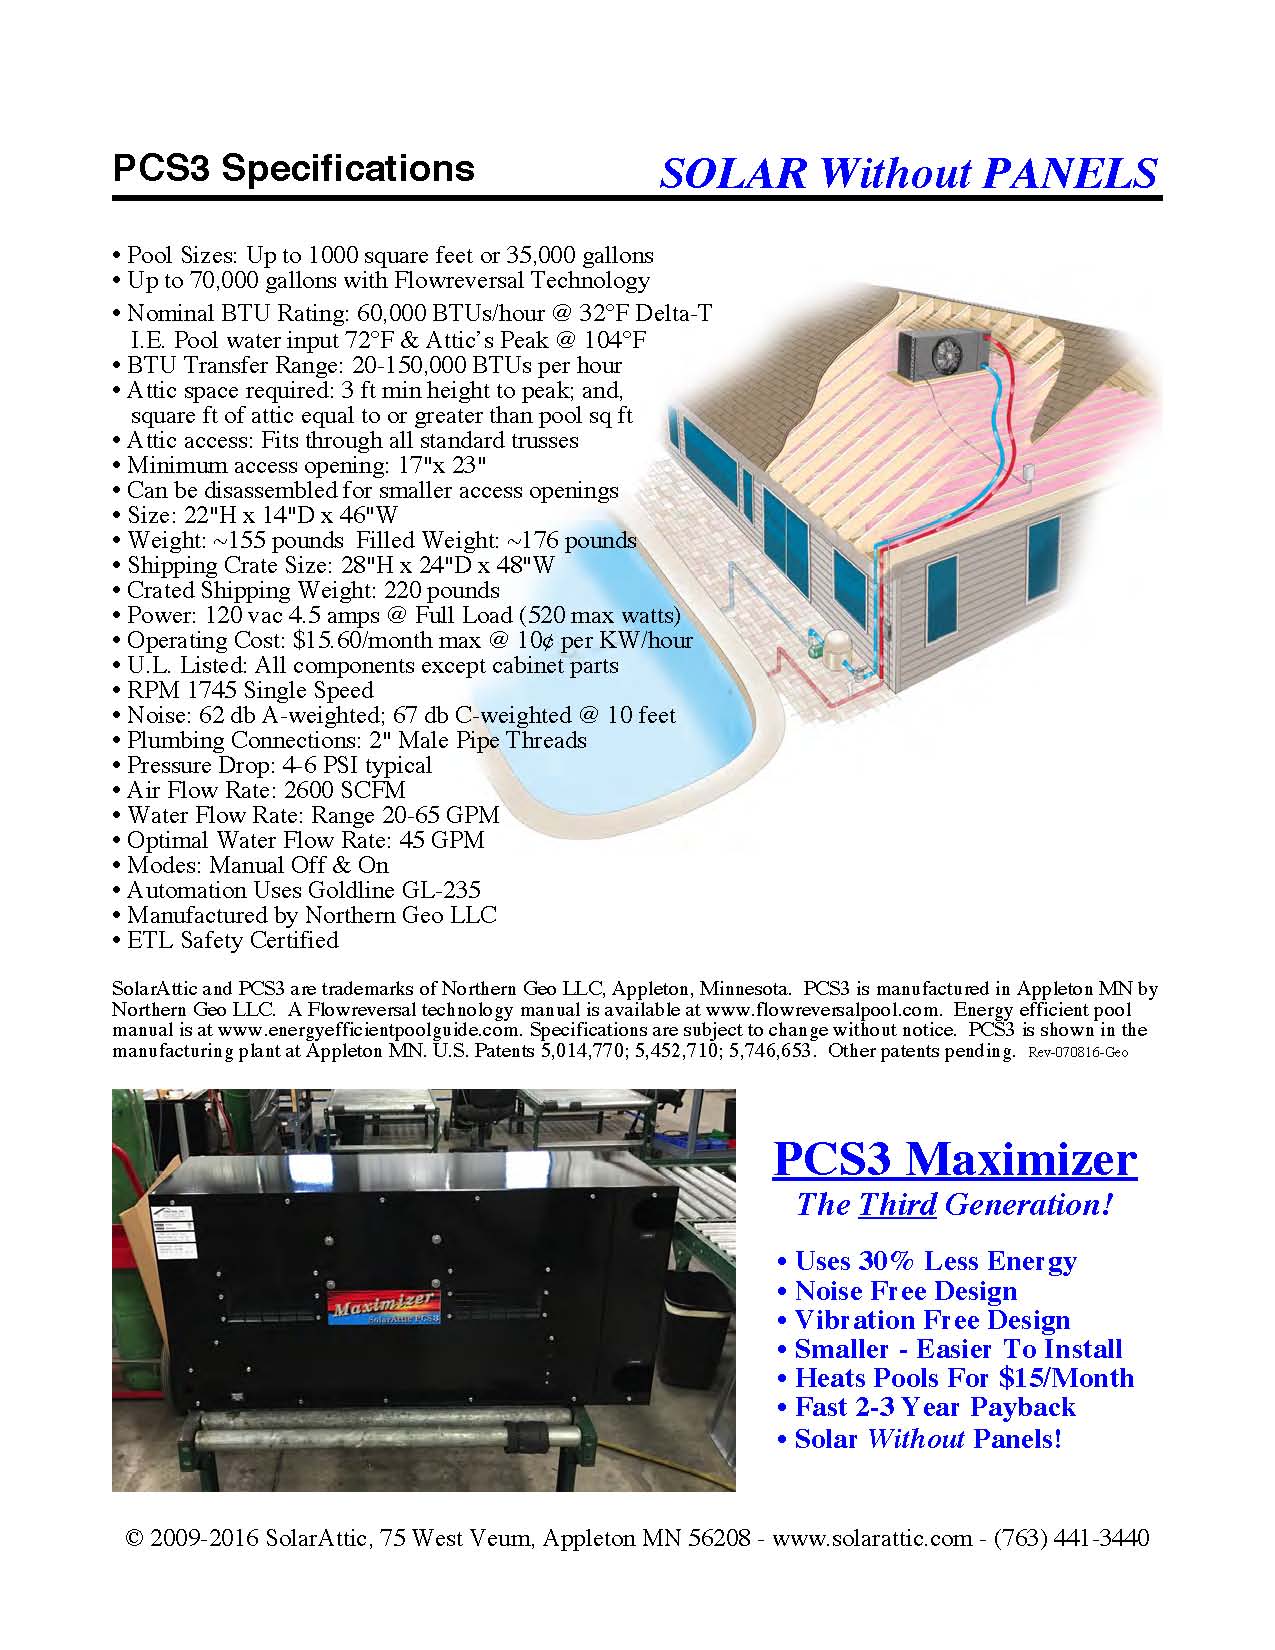 Image of the third generation attic solar pool heater model PCS3 specifications